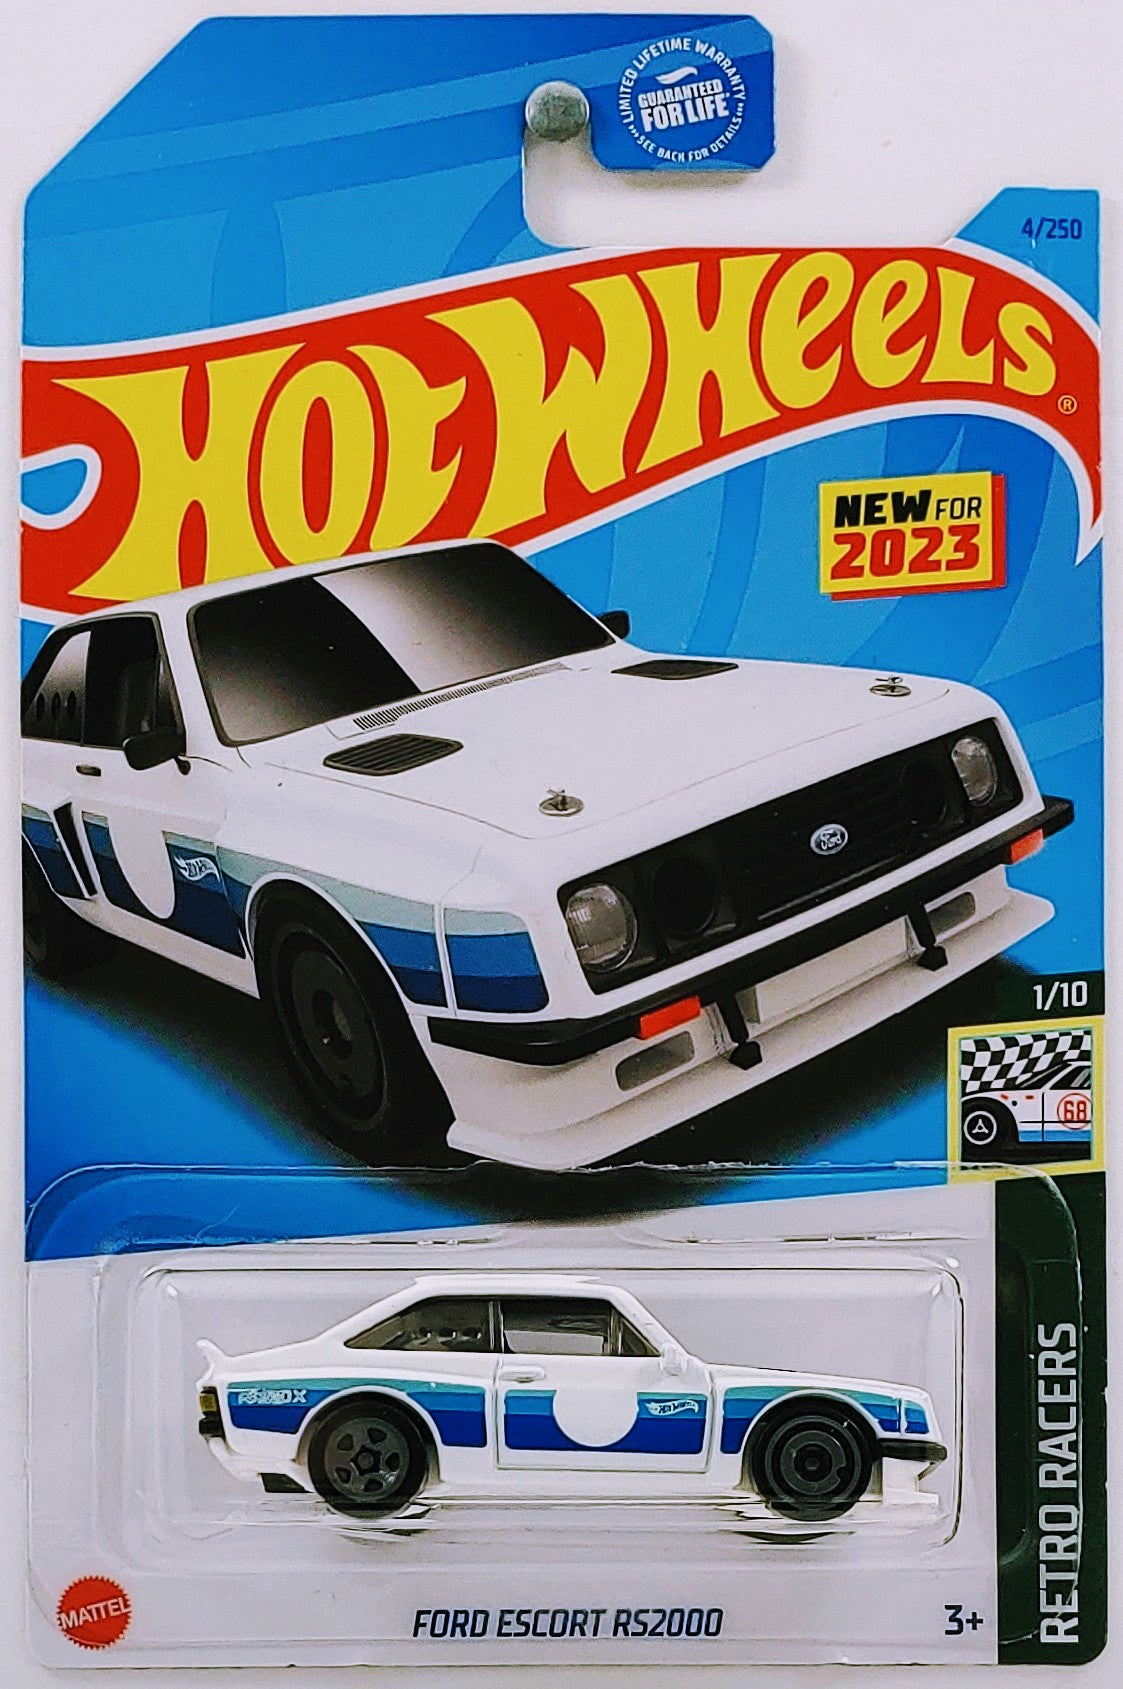 Hot Wheels 2023 - Collector # 004/250 - Retro Racers 1/10 - New Models - Ford Escort RS2000 - White - USA